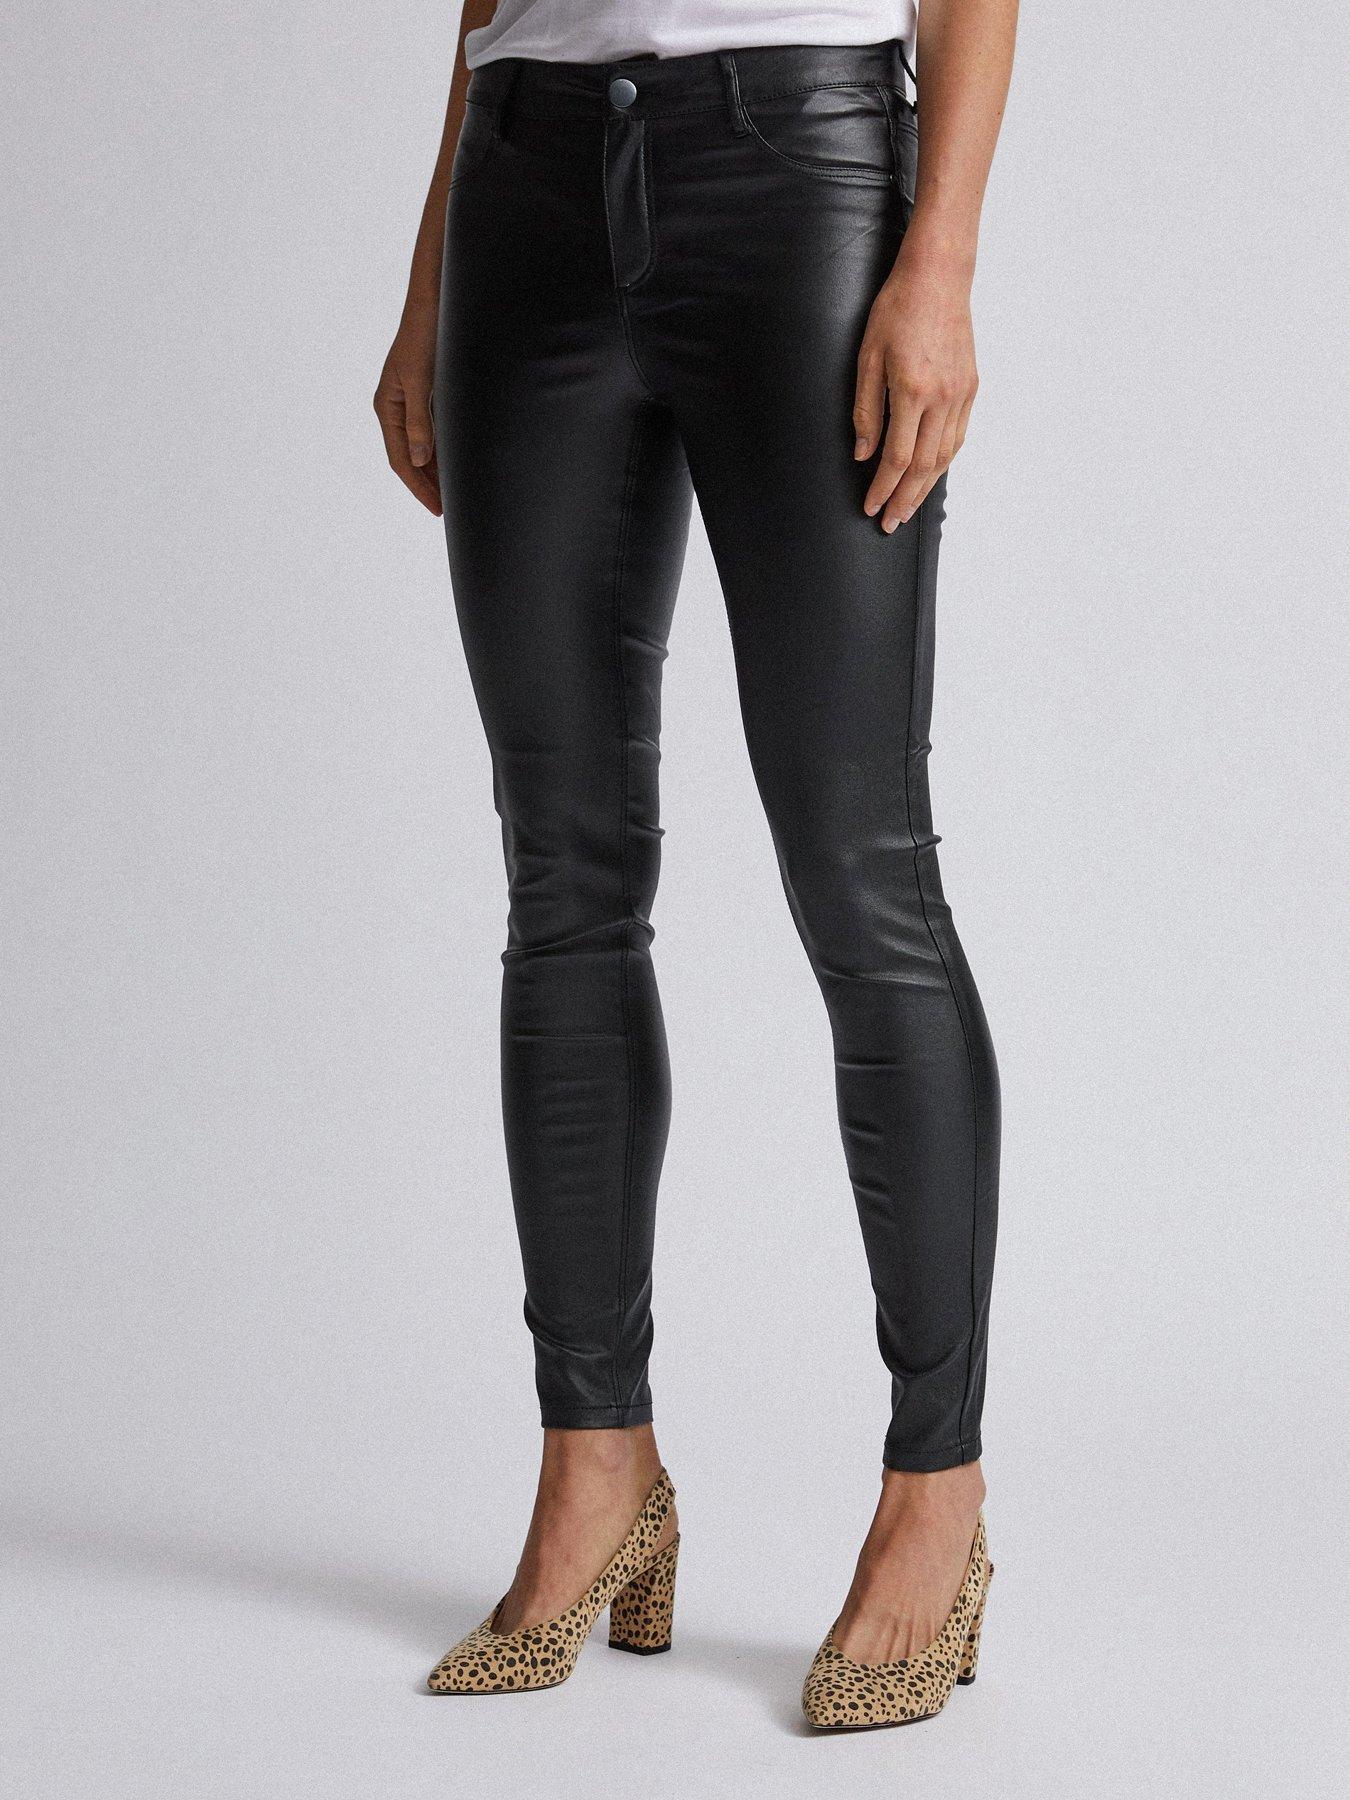 dorothy perkins leather look jeans